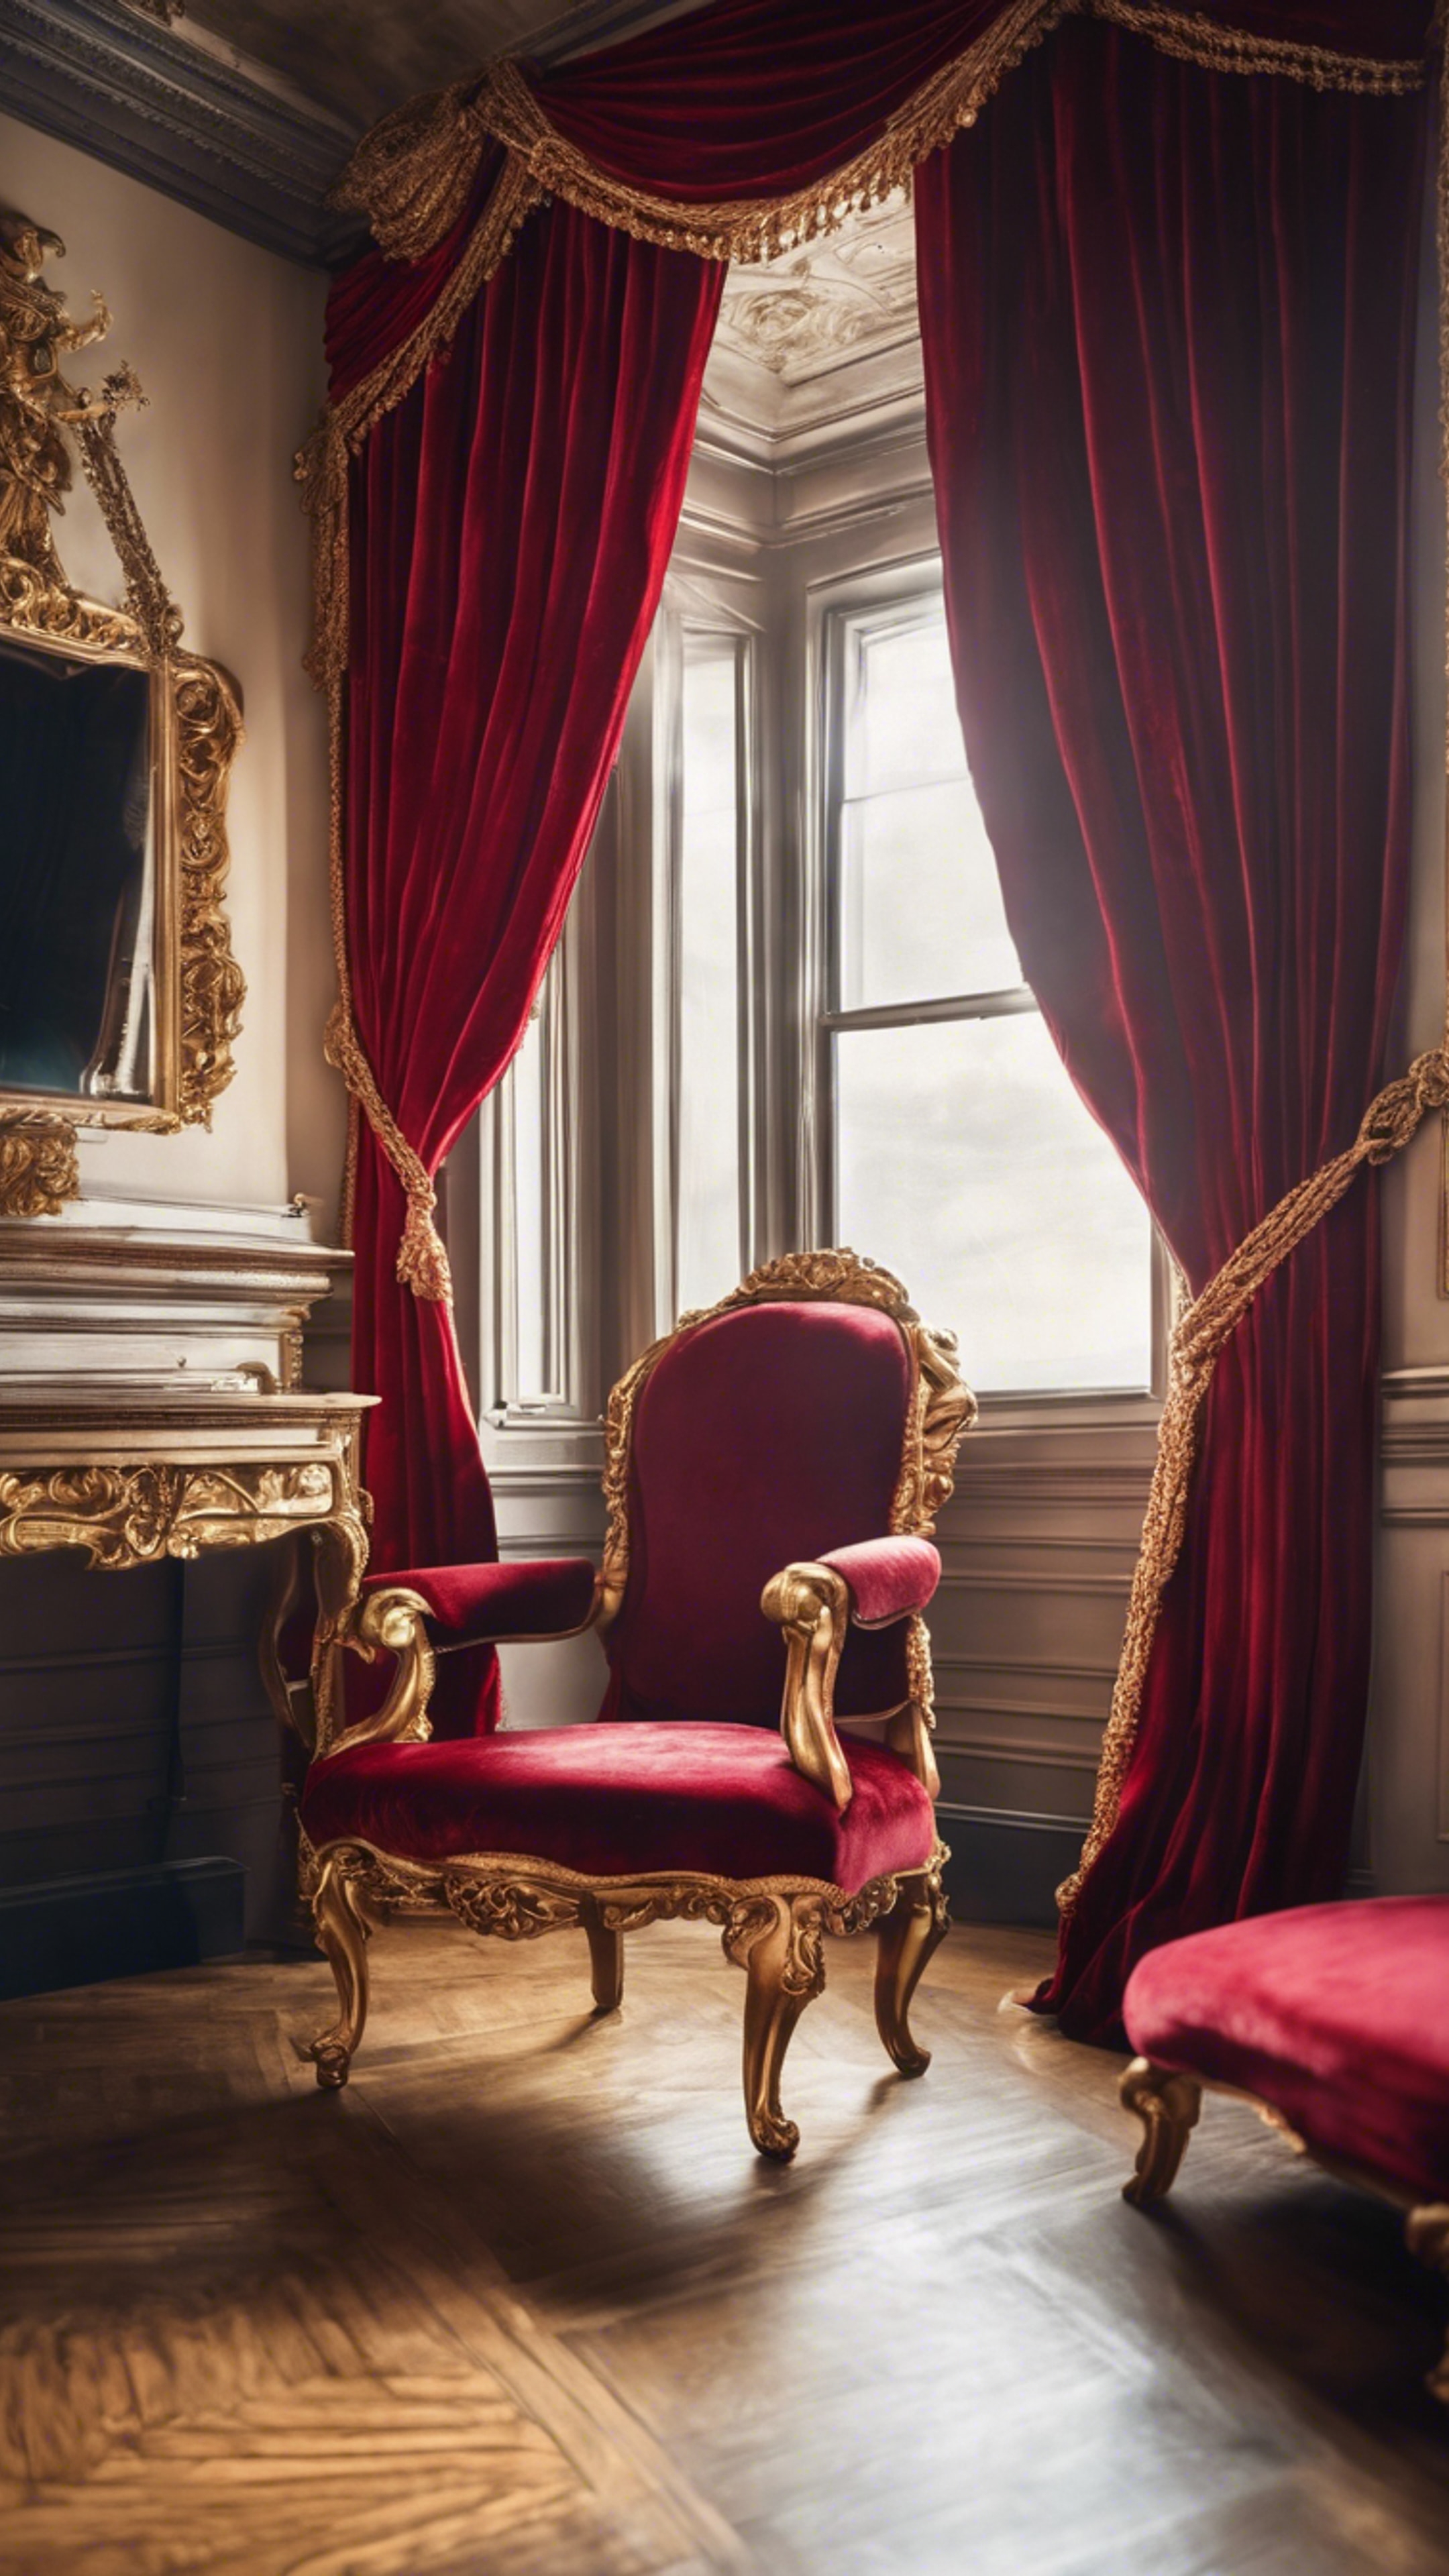 Red velvet drapes tied back with gold ropes in a grand victorian-style living room. Tapeta[6c8dd2a9b4f74c0eb869]